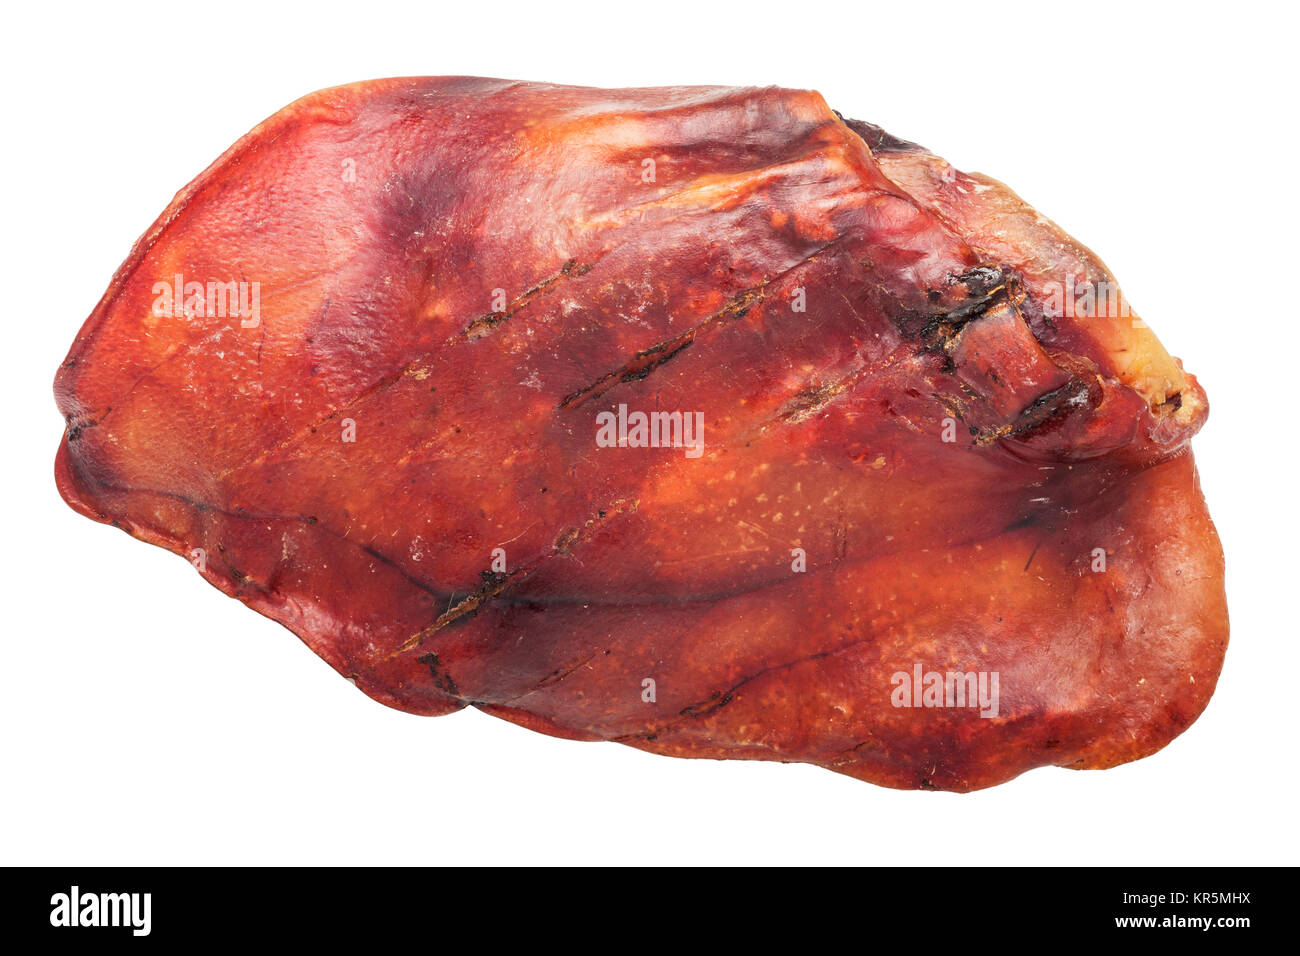 A real pigs ear used for dog treats on a white background Stock Photo